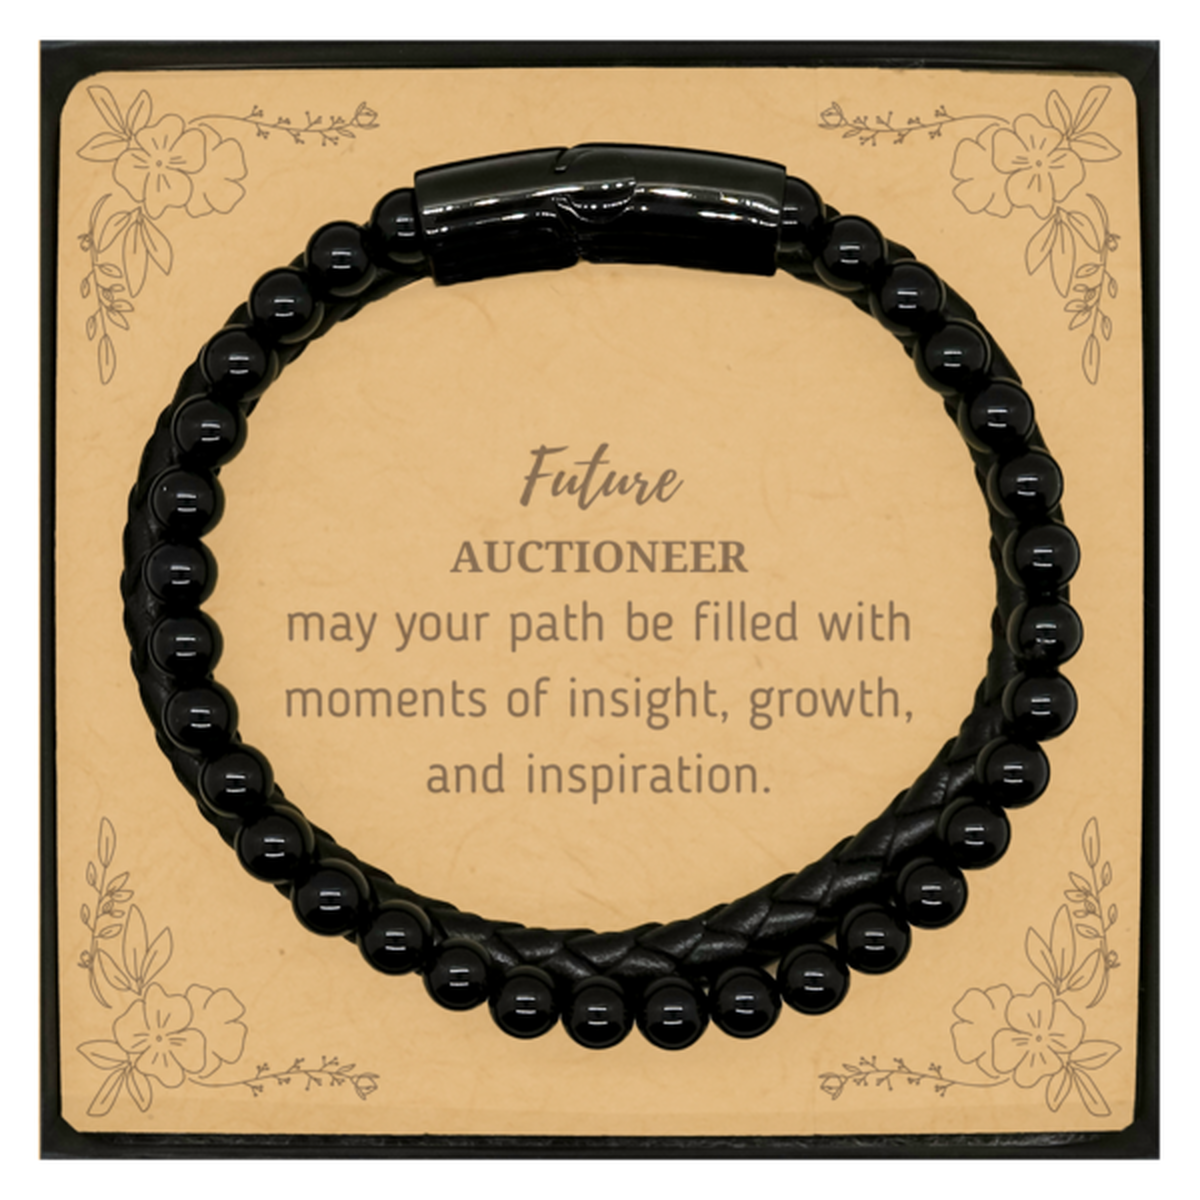 Future Auctioneer Gifts, May your path be filled with moments of insight, Graduation Gifts for New Auctioneer, Christmas Unique Stone Leather Bracelets For Men, Women, Friends